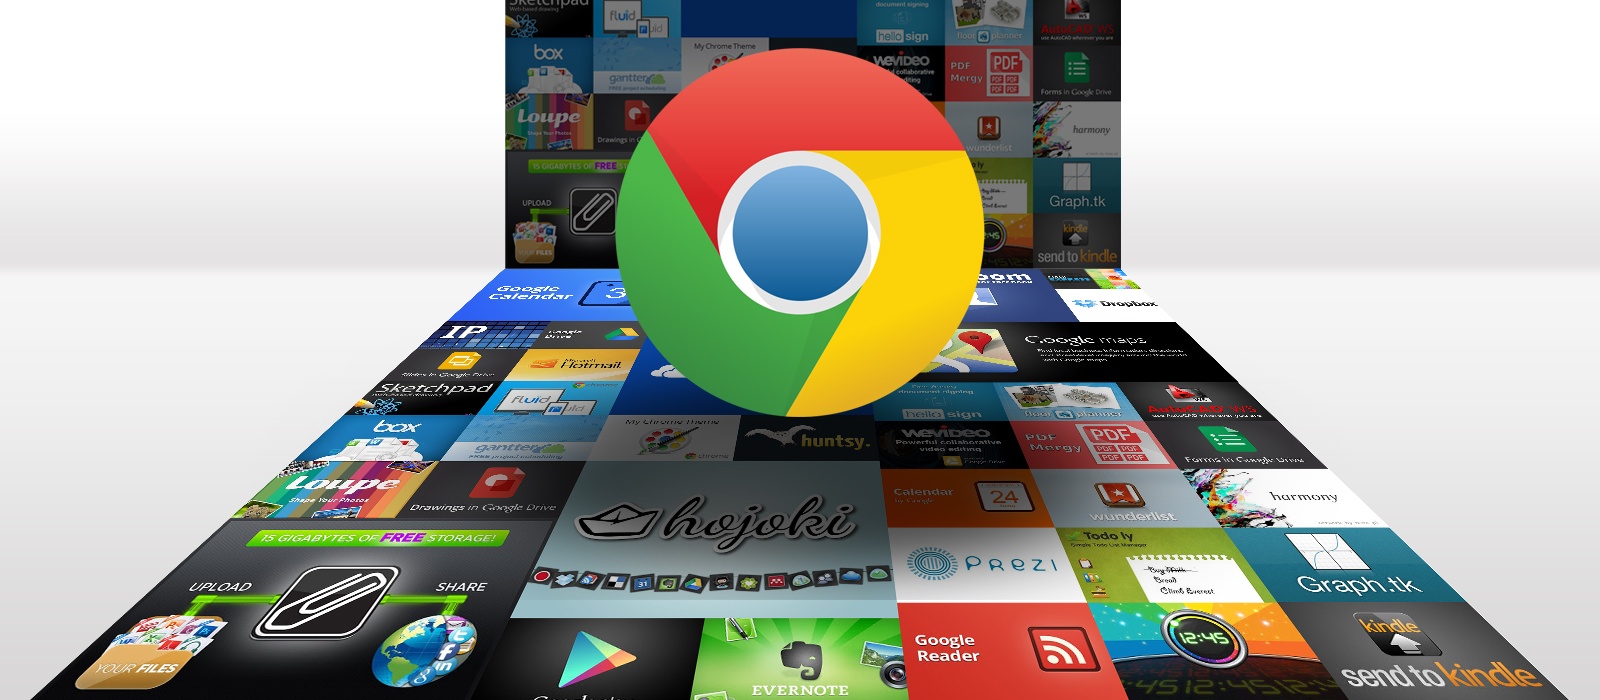 10 Best Chrome Extensions of 2012